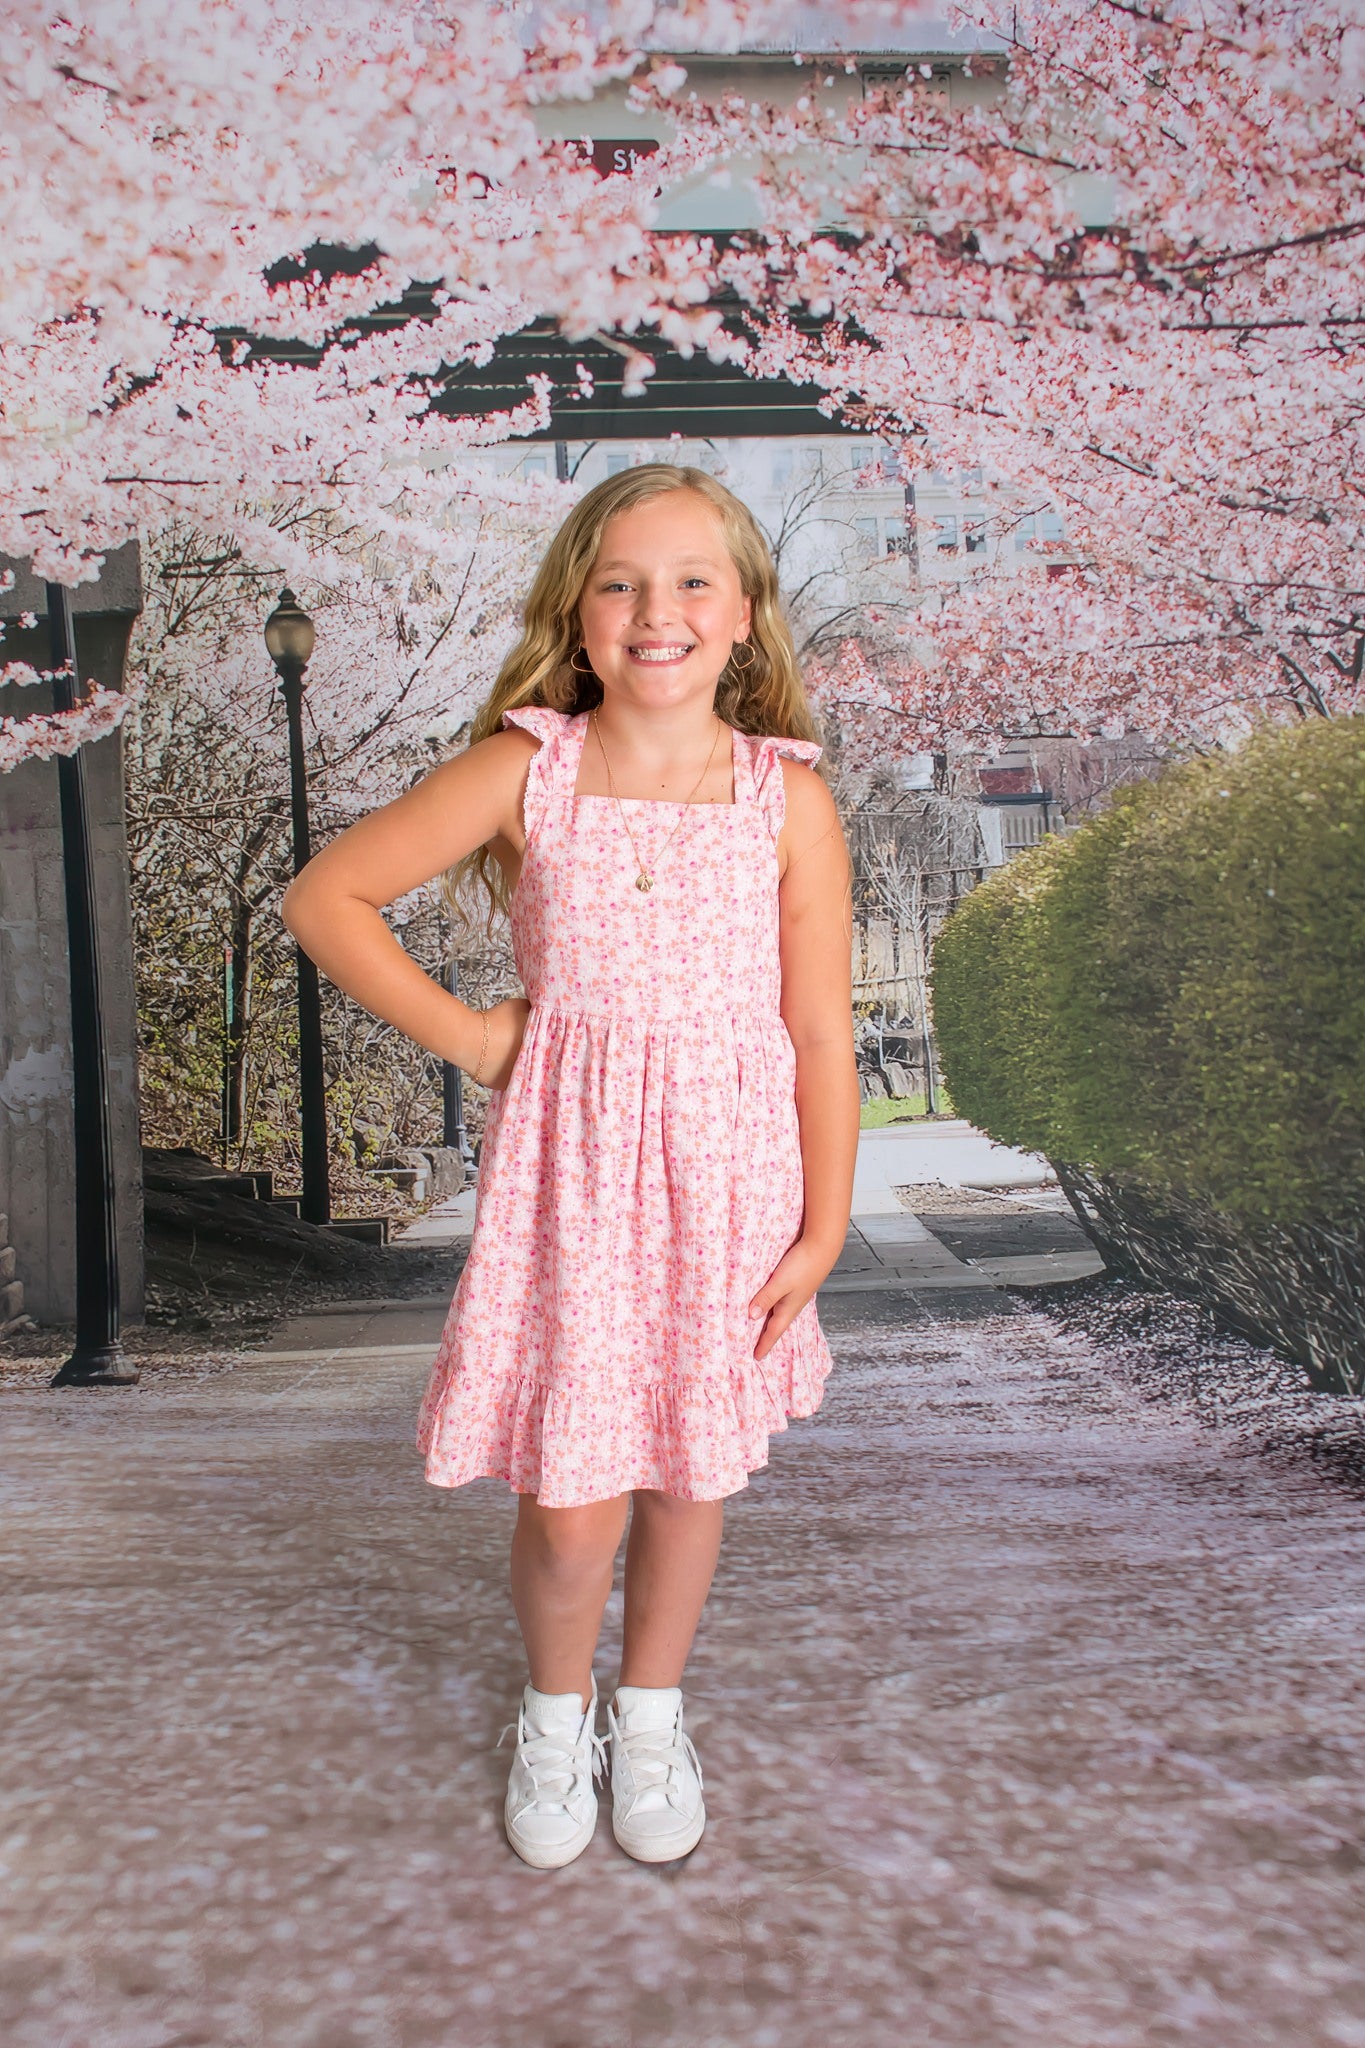 Kate Cherry Blossom Archway Backdrop for Photography Designed by Erin Larkins